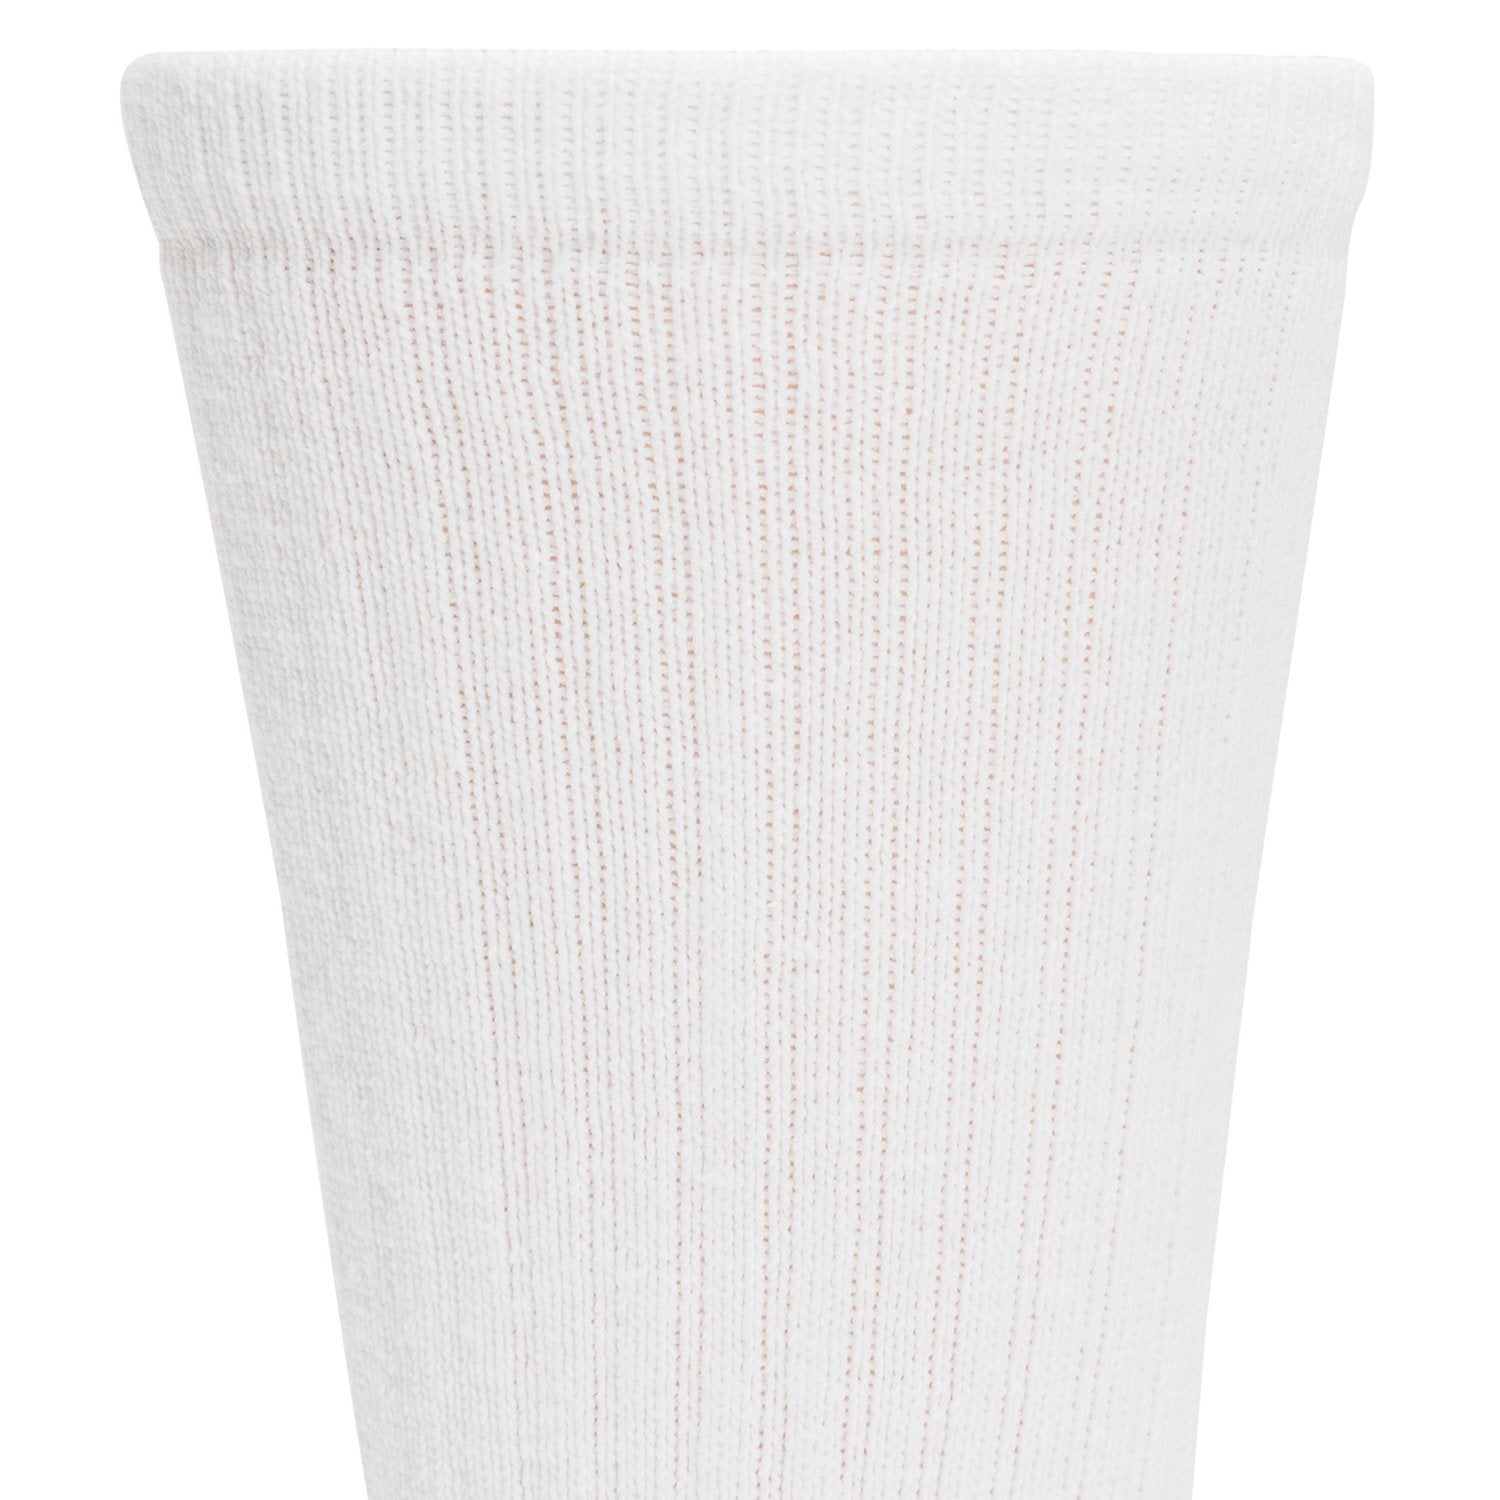 Super 60® Crew 6-pack Midweight Cotton Socks - White cuff perspective - made in The USA Wigwam Socks